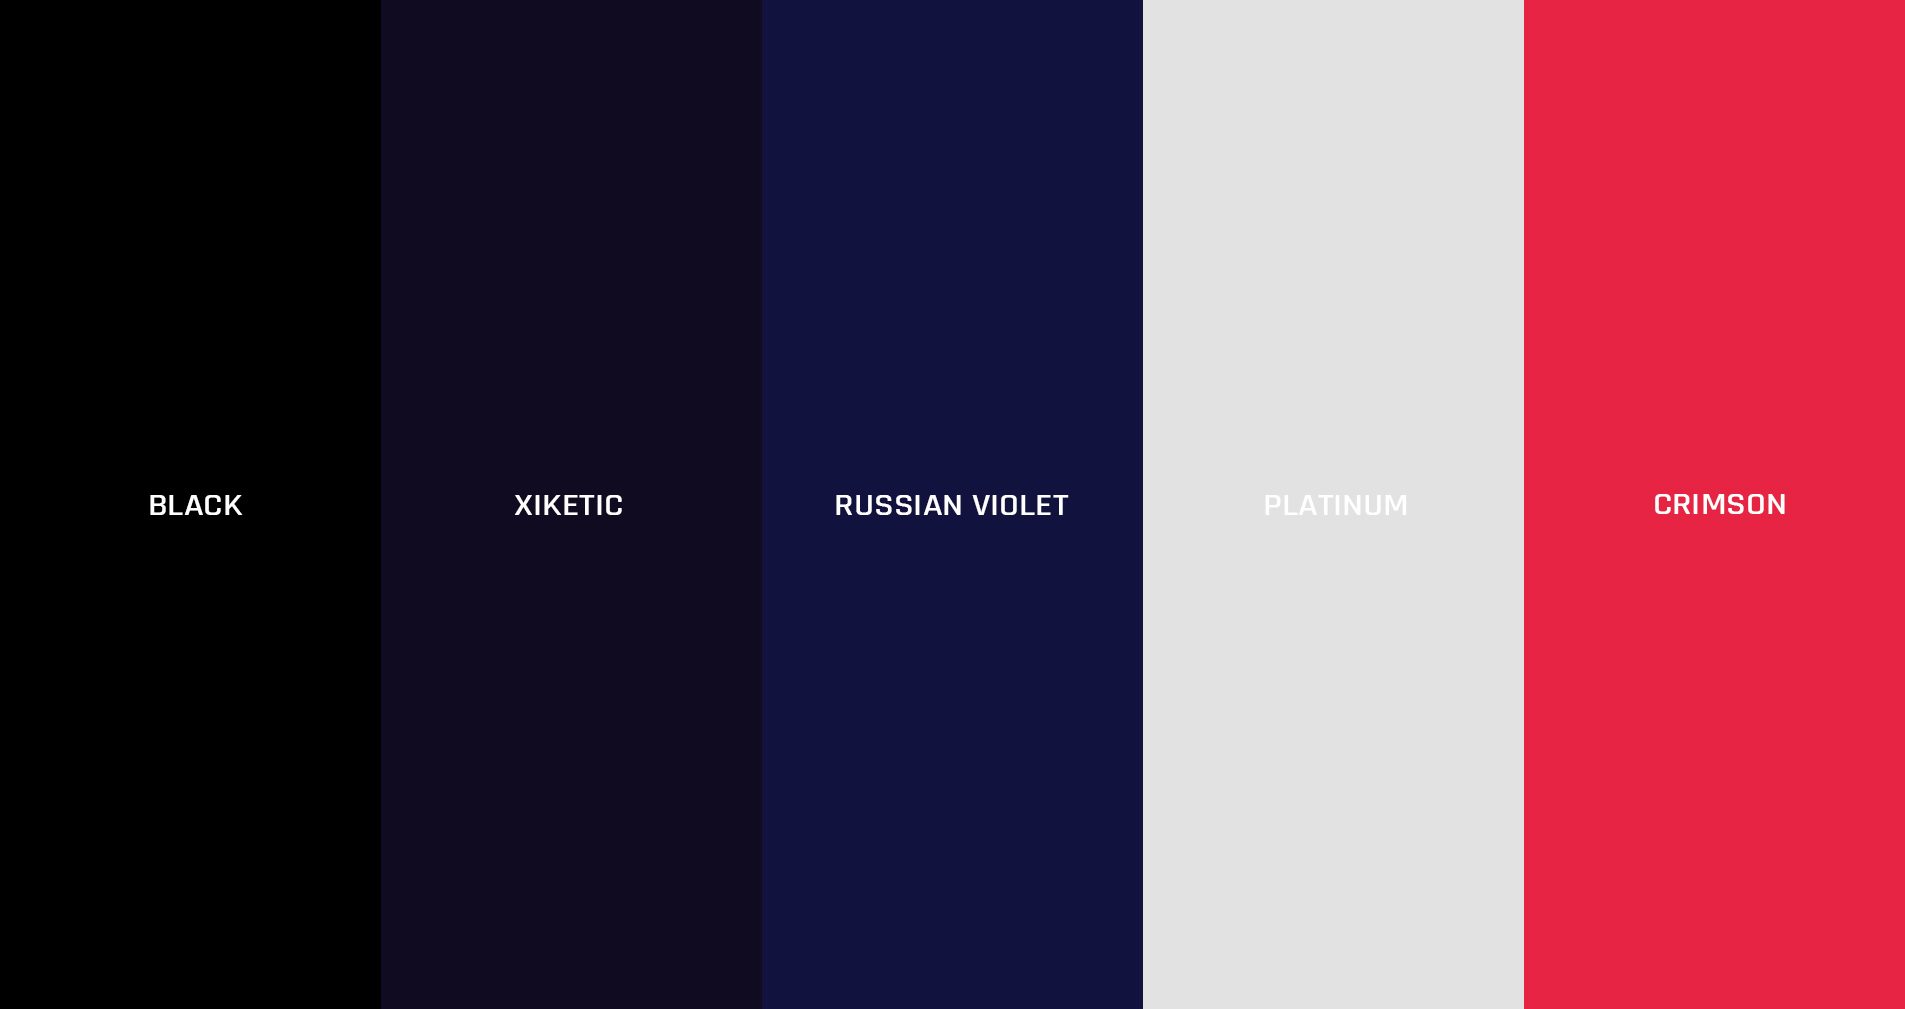 This image shows the colour palette for branding of FiveT 